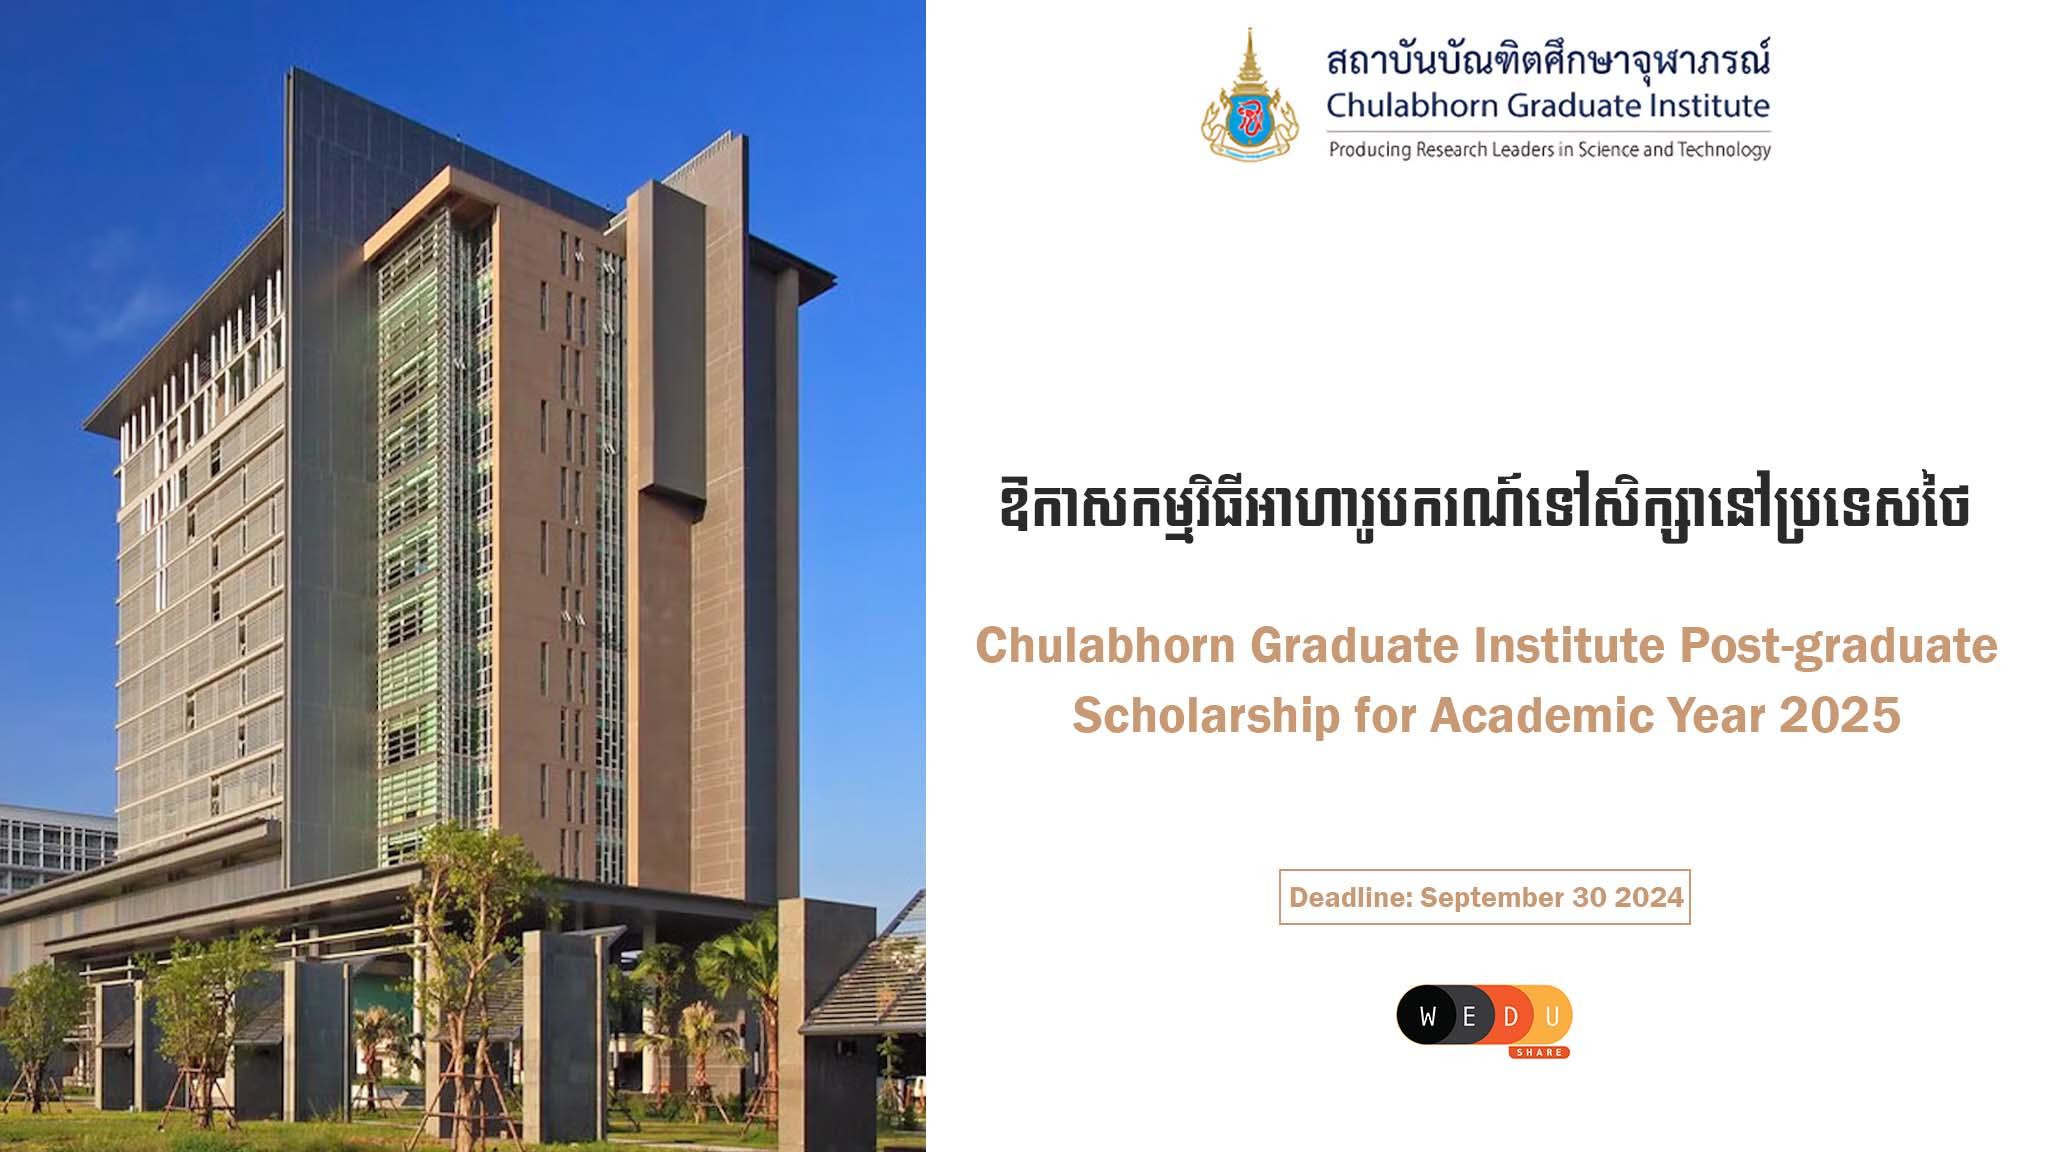 Chulabhorn Graduate Institute Post-graduate Scholarship for Academic Year 2025